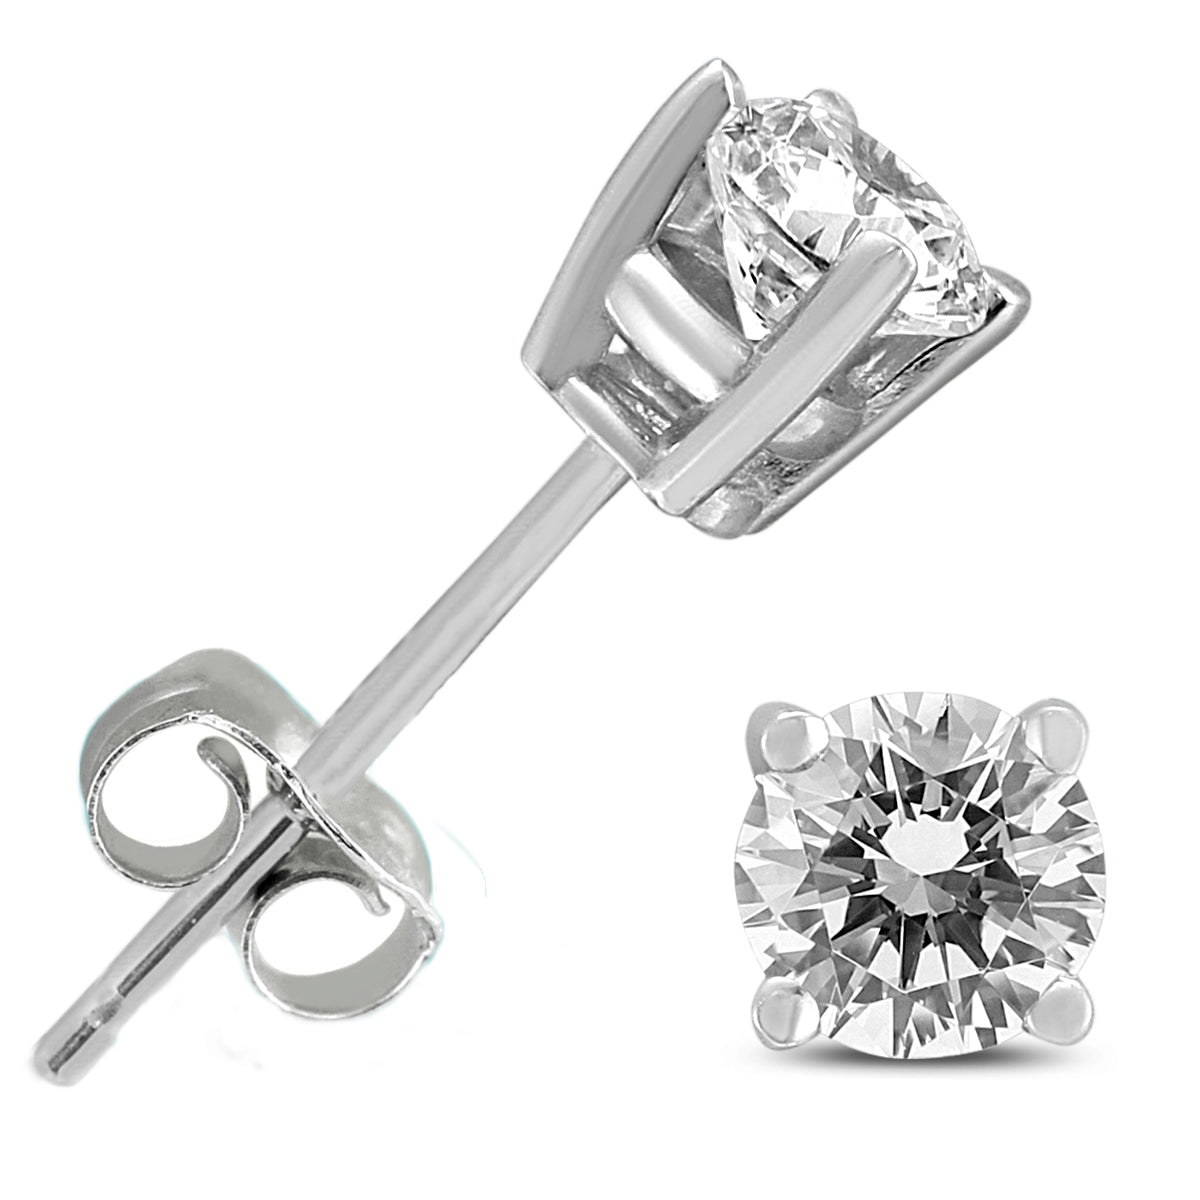 1/2 CARAT TW ROUND DIAMOND SOLITAIRE EARRINGS IN 14K WHITE GOLD